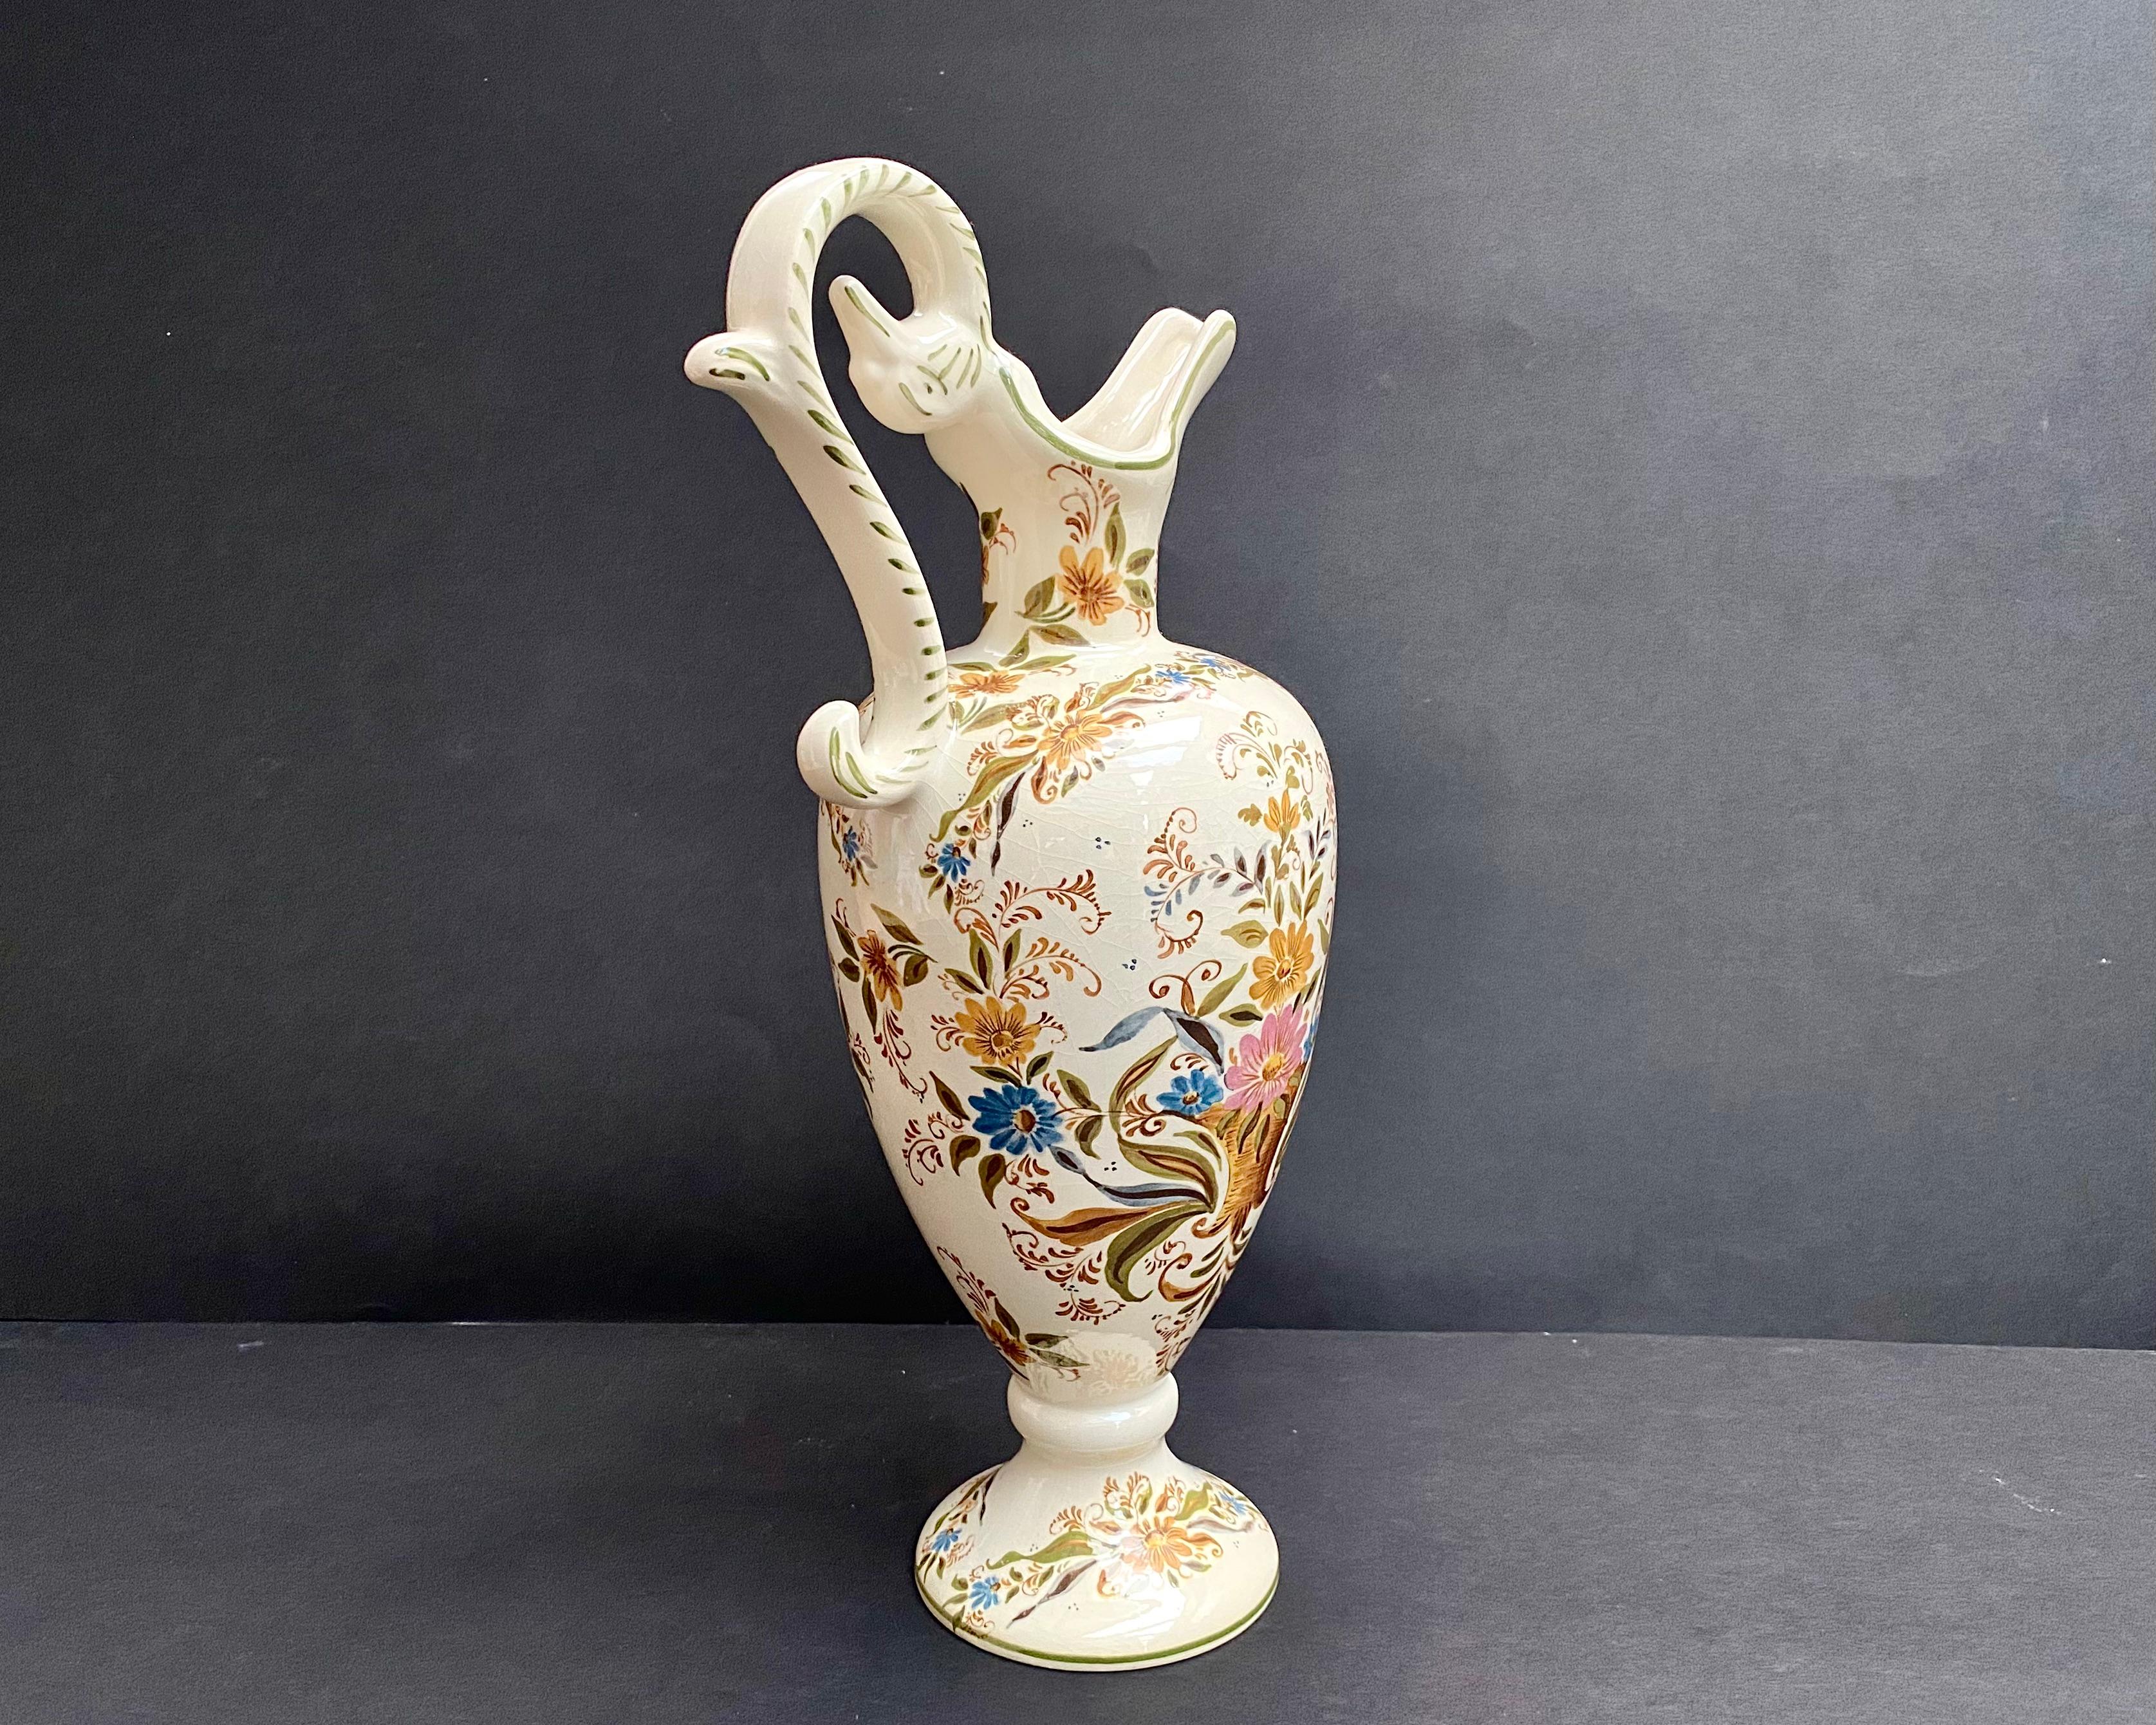 Enamelled faience ewer from the 1950s, made in Belgium, attributed to Hubert Bequet & Holland Delft’s.

Vintage vase with a beautifull ivory background decorated with a bright colorful pattern of a colorful flowers.

Marking on the bottom: Holland